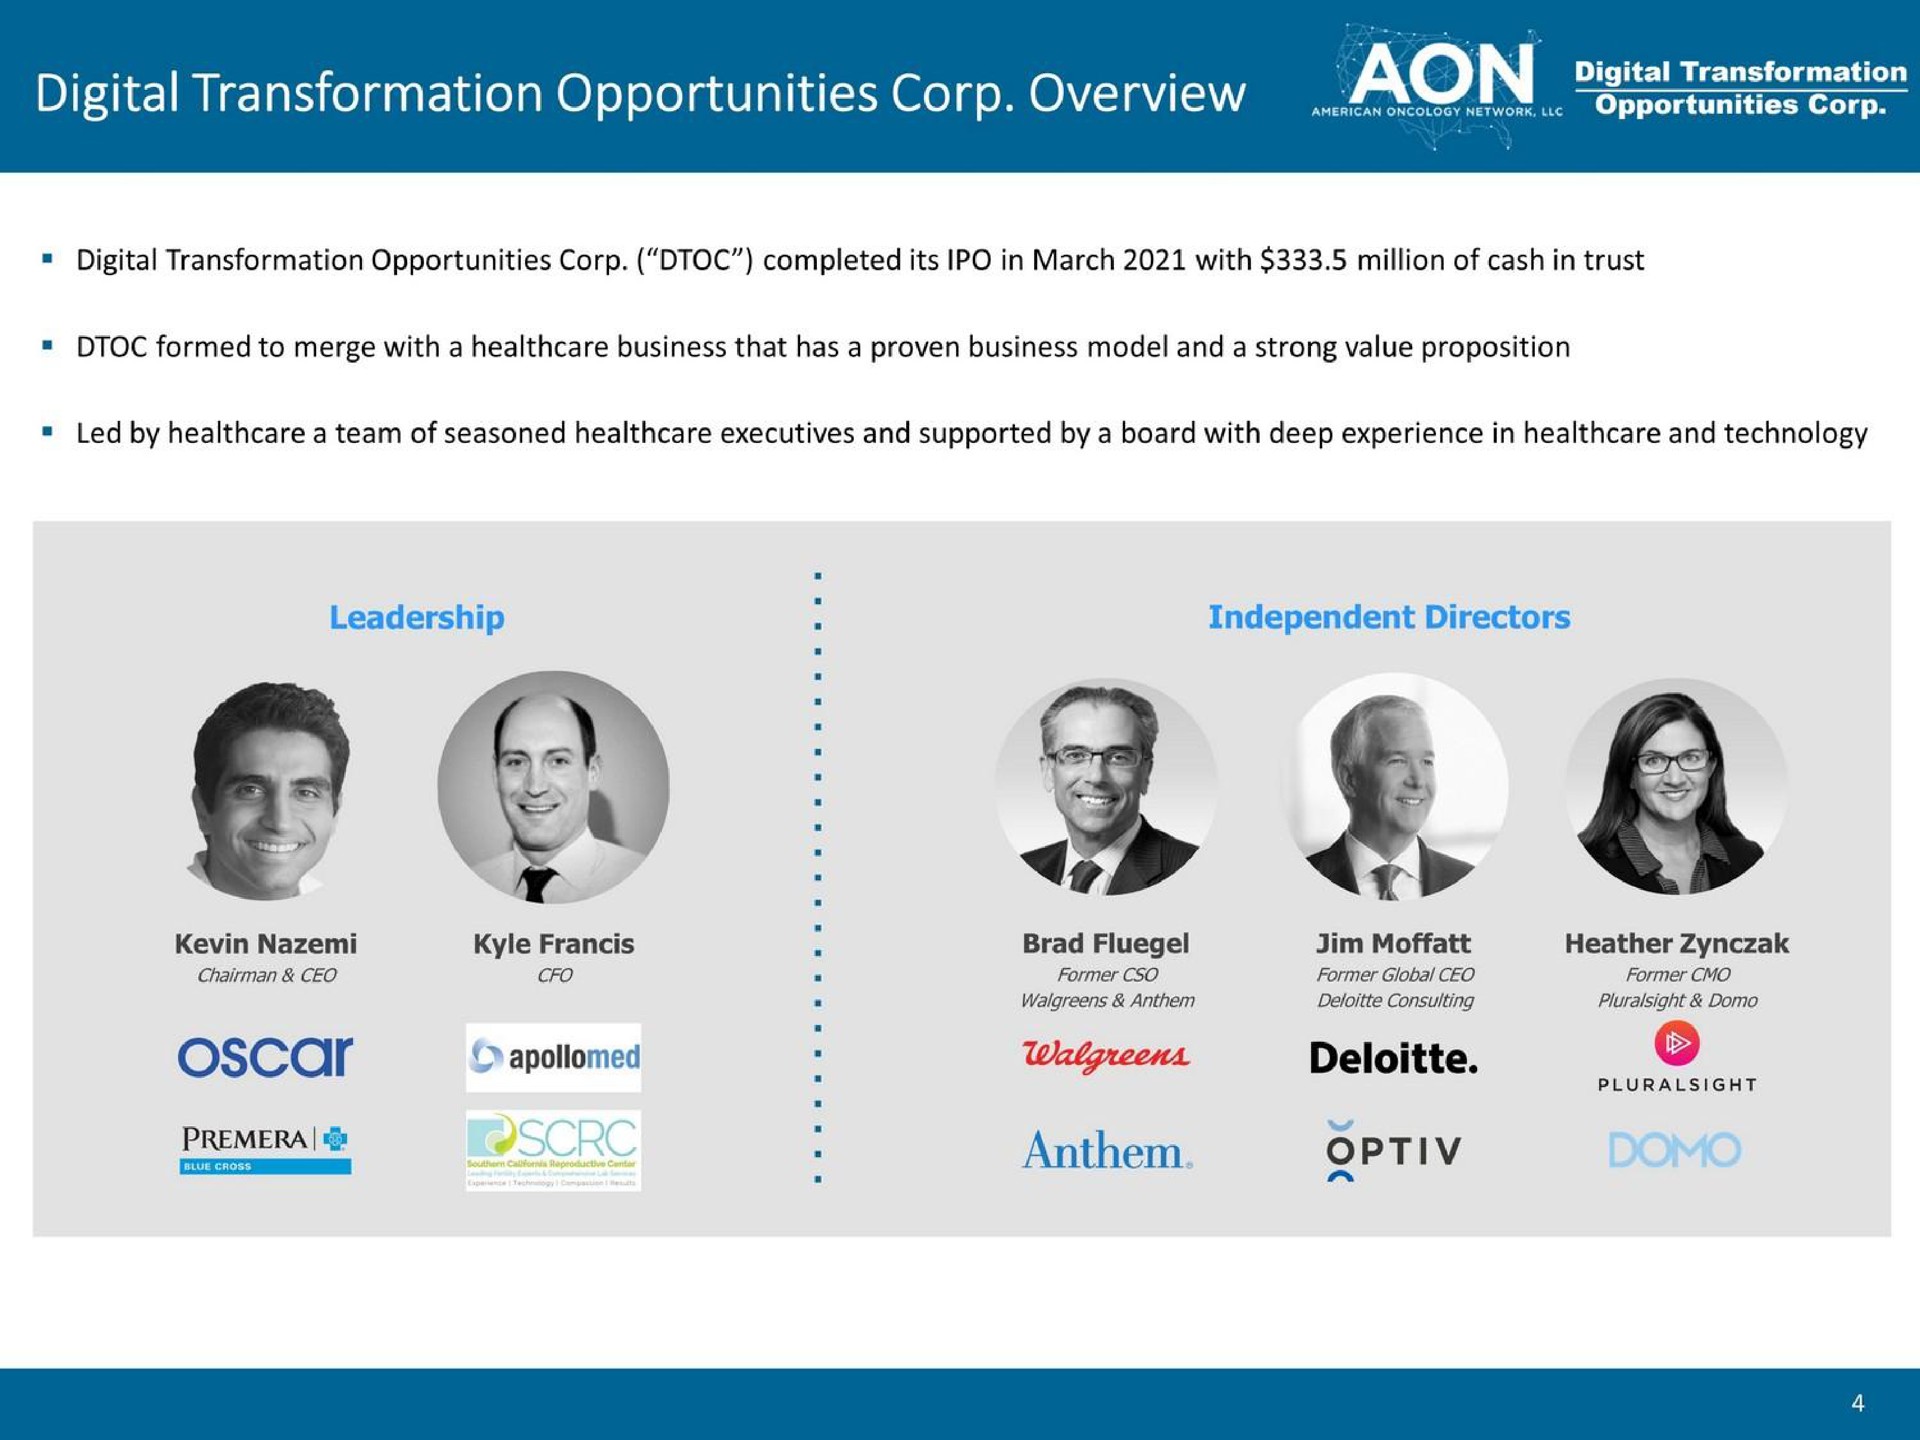 digital transformation opportunities corp overview anthem | American Oncology Network